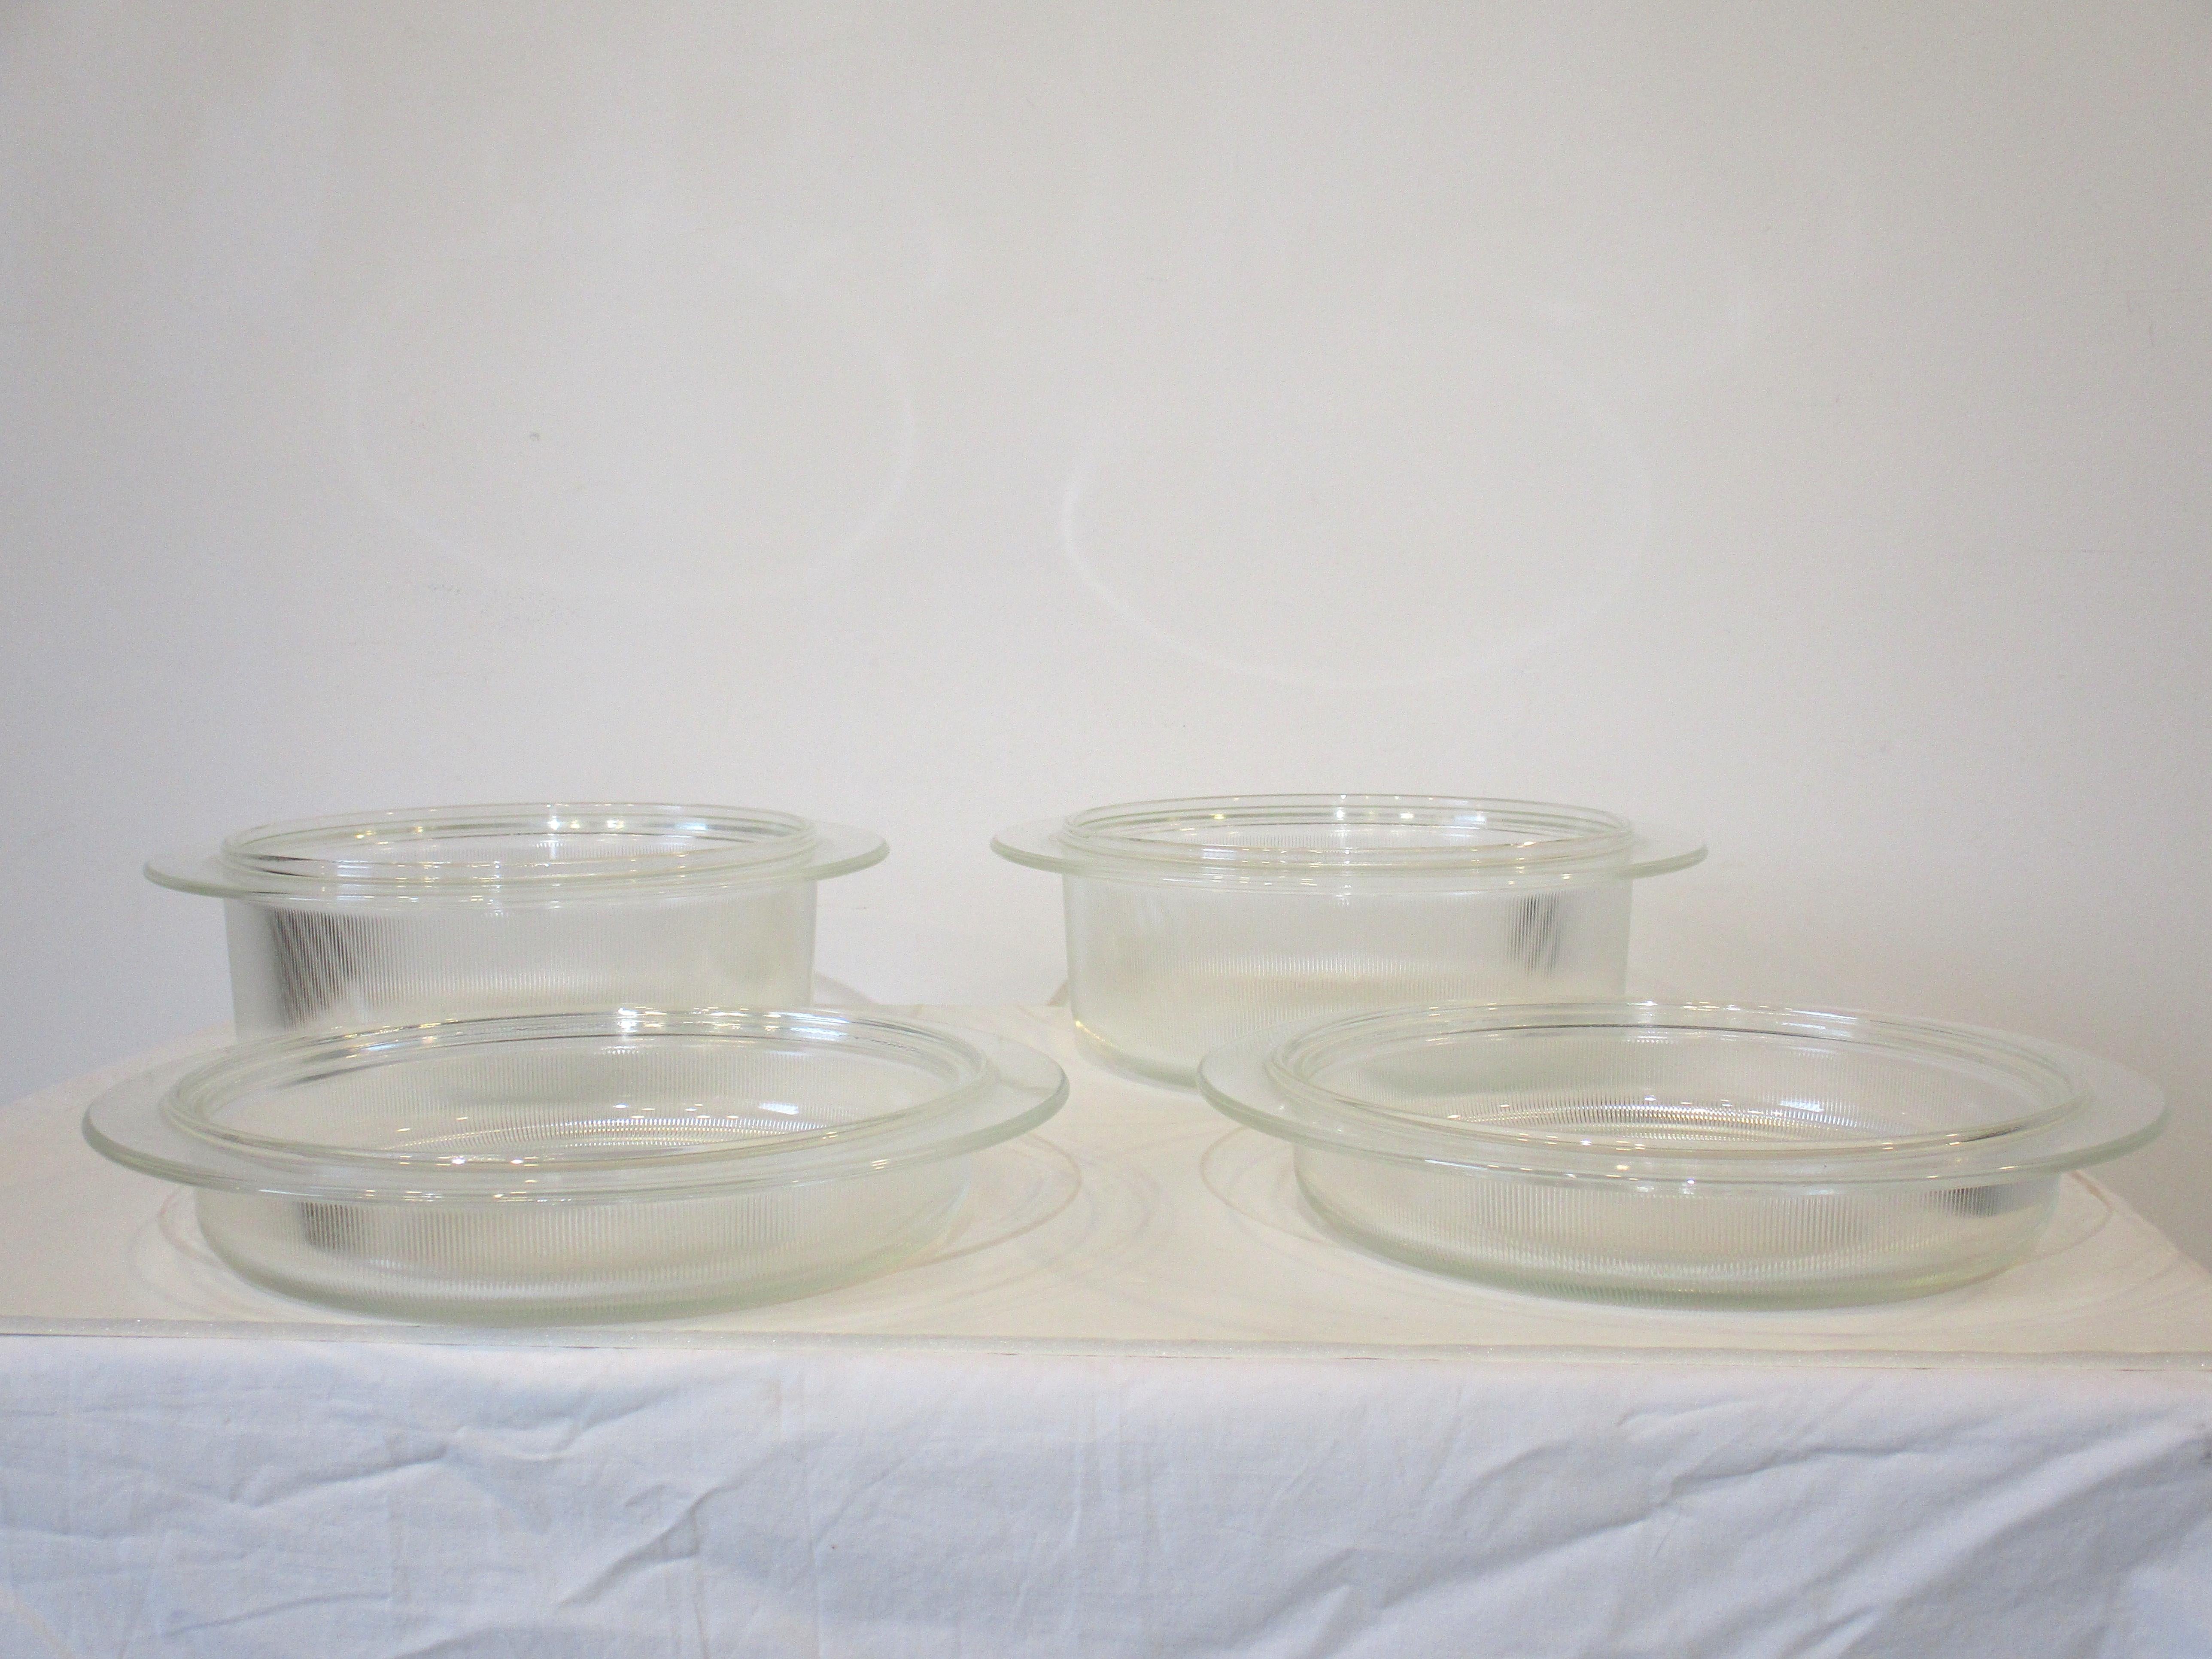 American Heller 3 Quart Glass Bakeware with Lids by L & M Vignelli For Sale